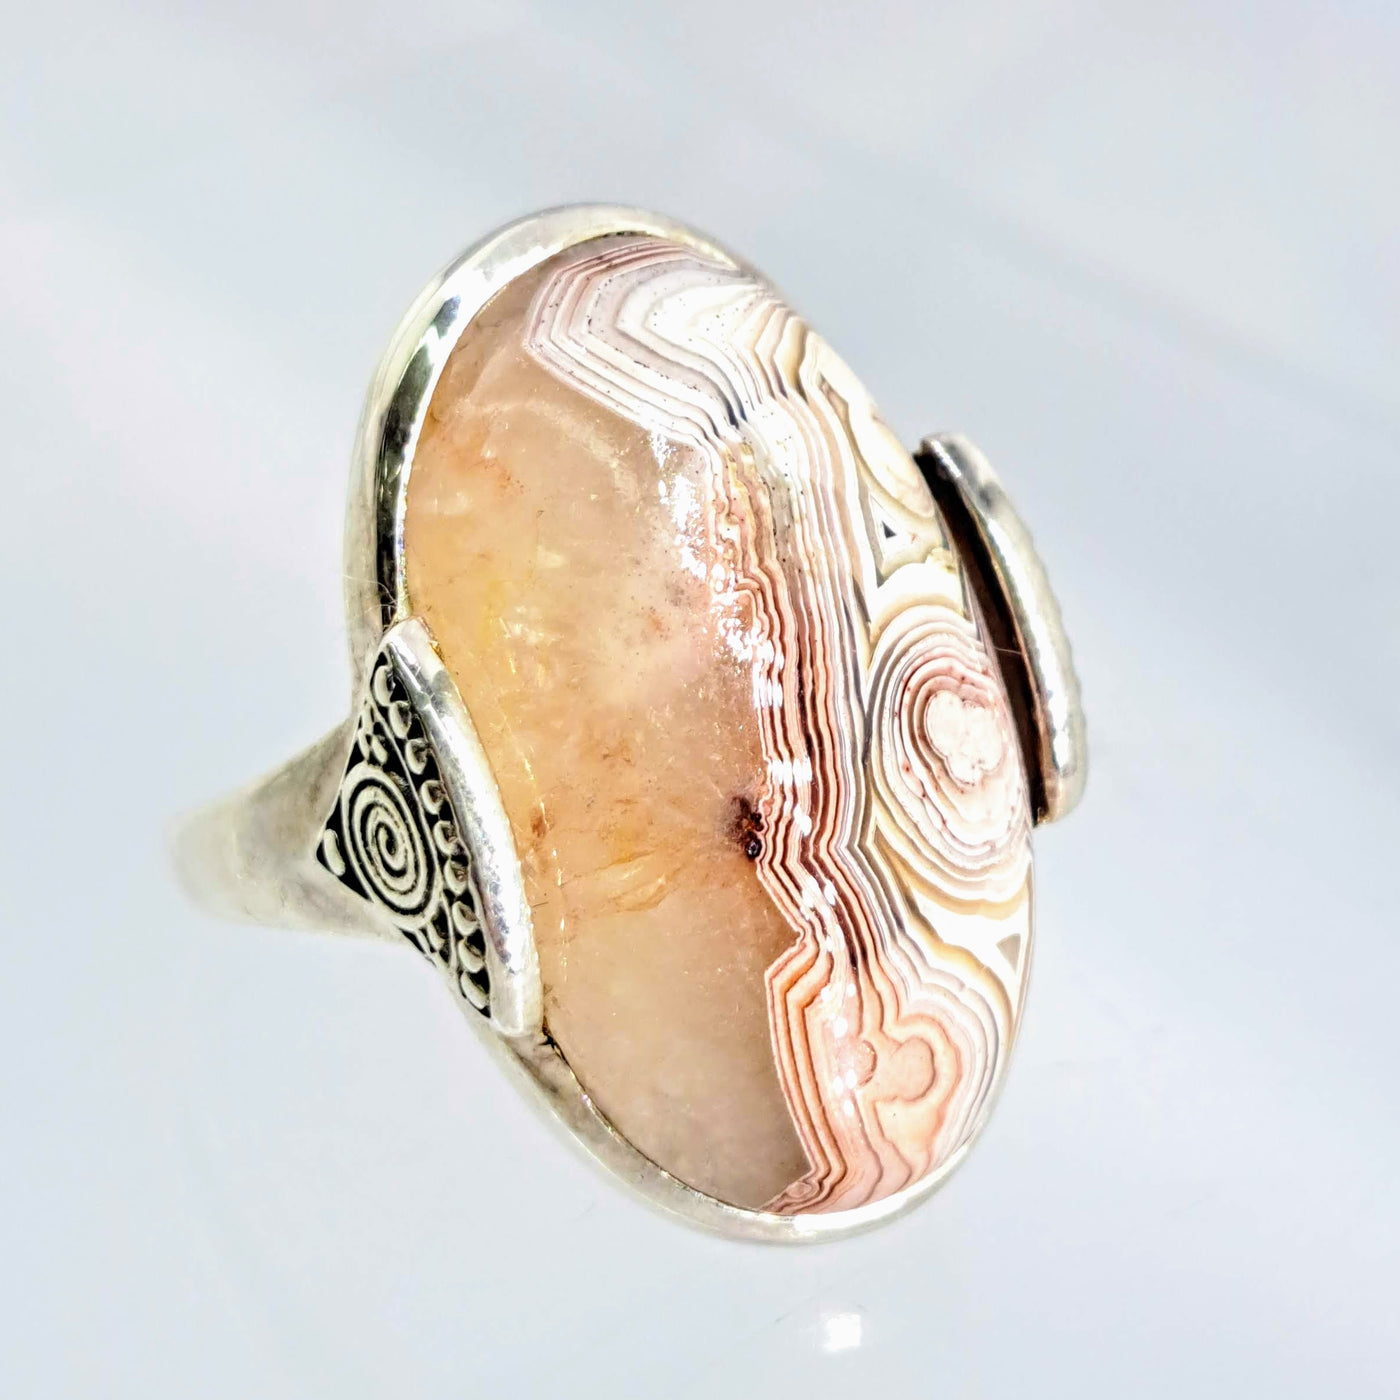 "Crazy Mexican" Sz 8 Ring - Mexican Crazy Lace Agate, Sterling